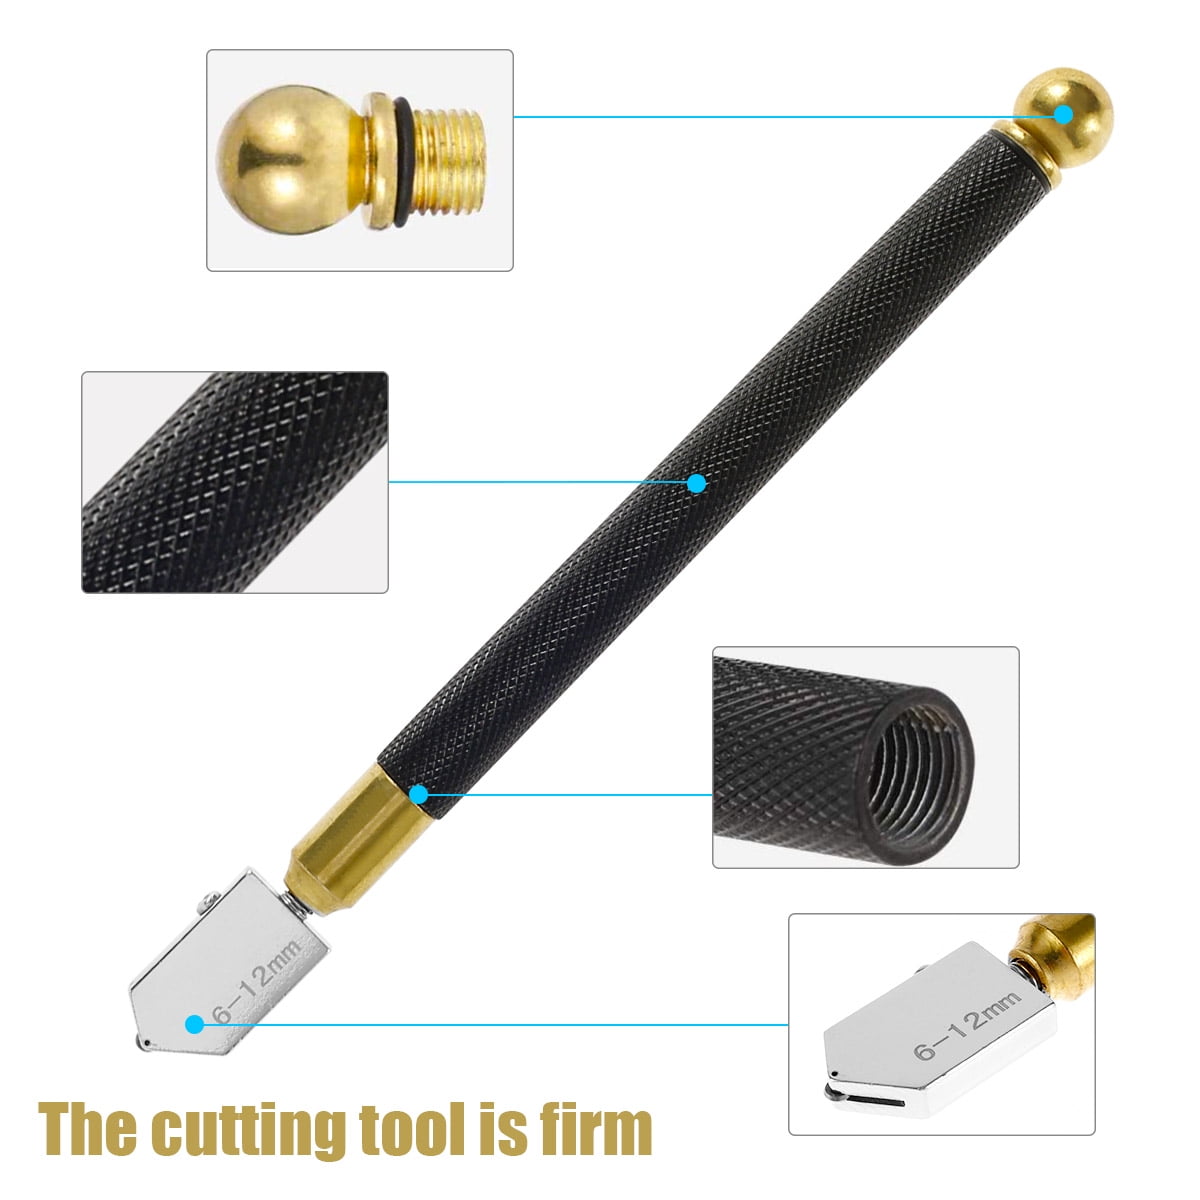 Glass Cutter Kit with Cutting Oil, 2mm-20mm Professional Cutting Head,  Aotomatic Pencil Oil Feed Carbide Tip Glass Cutter Tool for Thick Glass  Mosaic